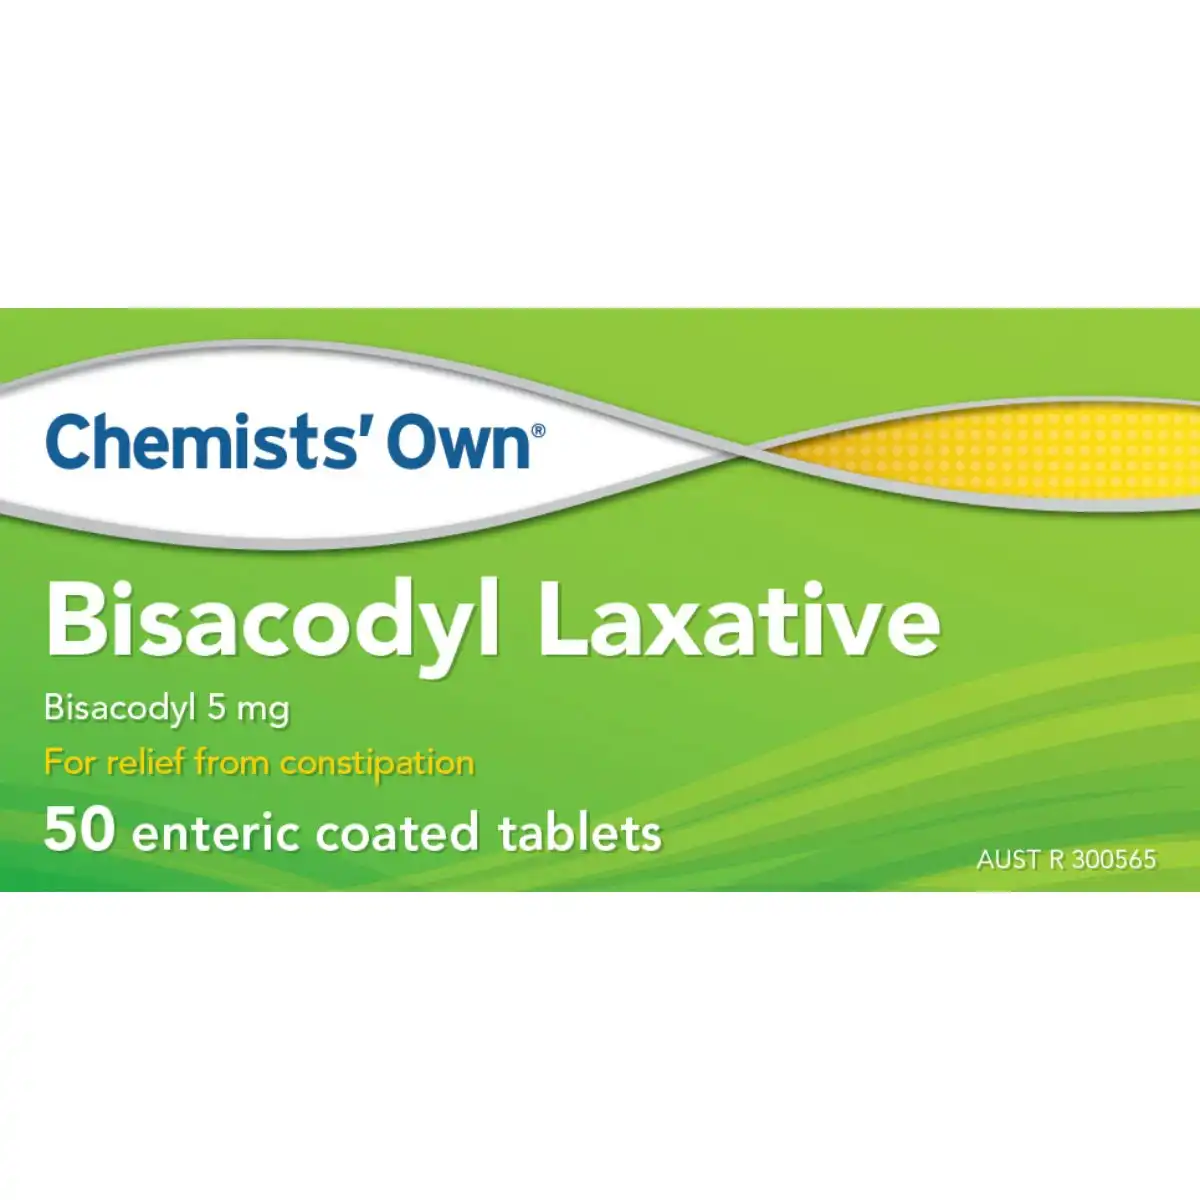 Chemists' Own Bisacodyl Laxative 50 Tablets (Generic of DULCOLAX)